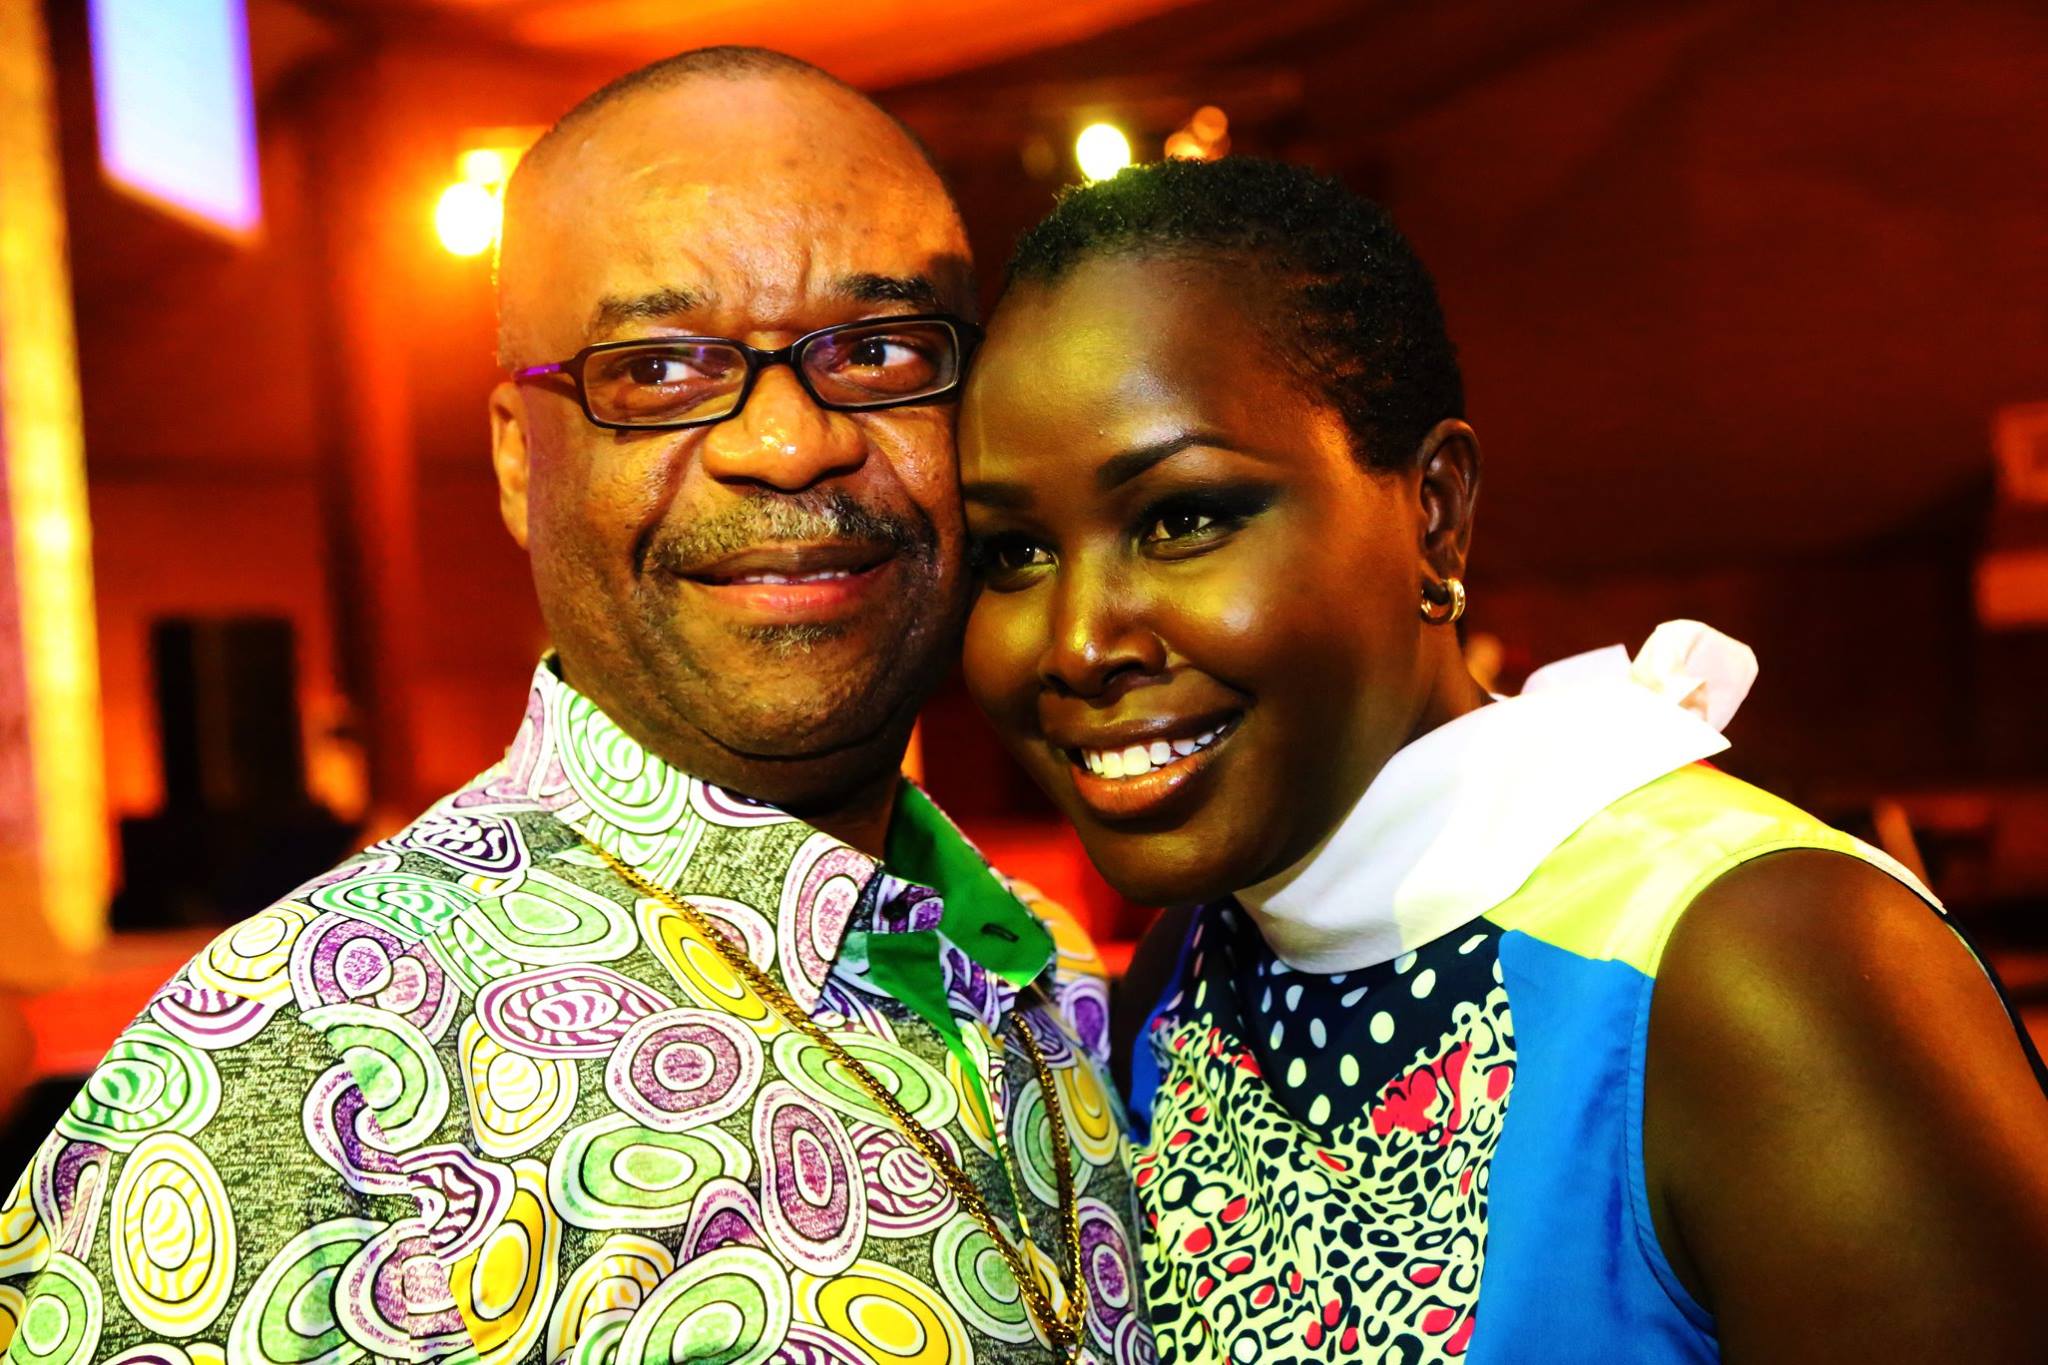 Never seen before photo of Emmy Kosgei kissing her husband, now this is adorable!